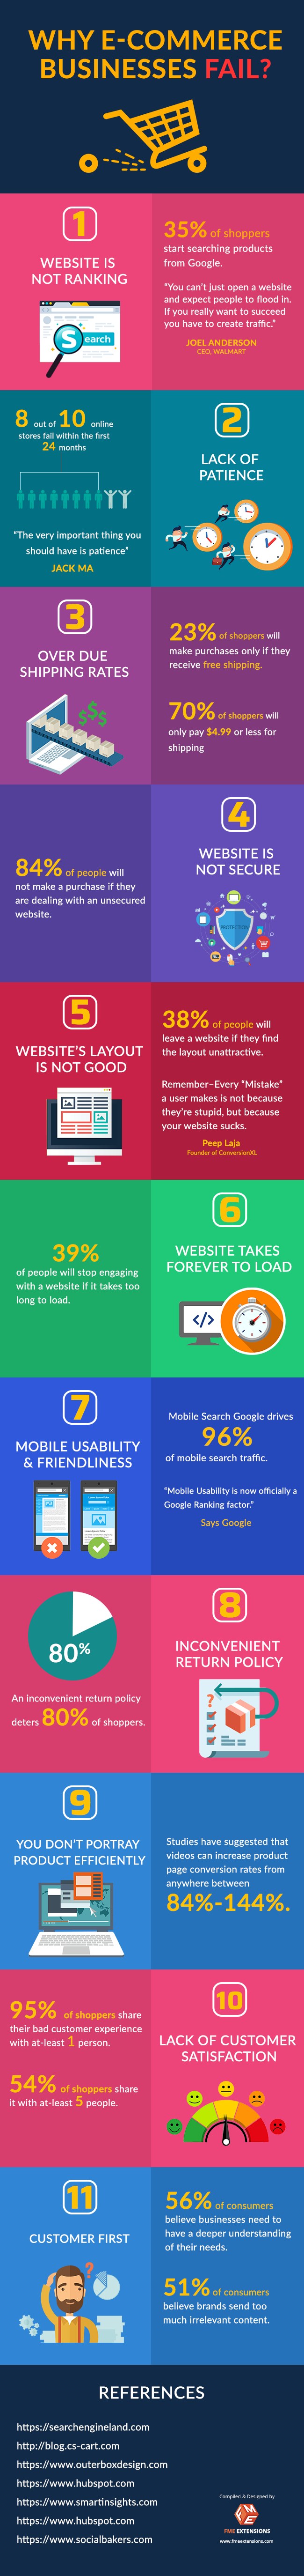 why-ecommerce-businesses-fail-infographic